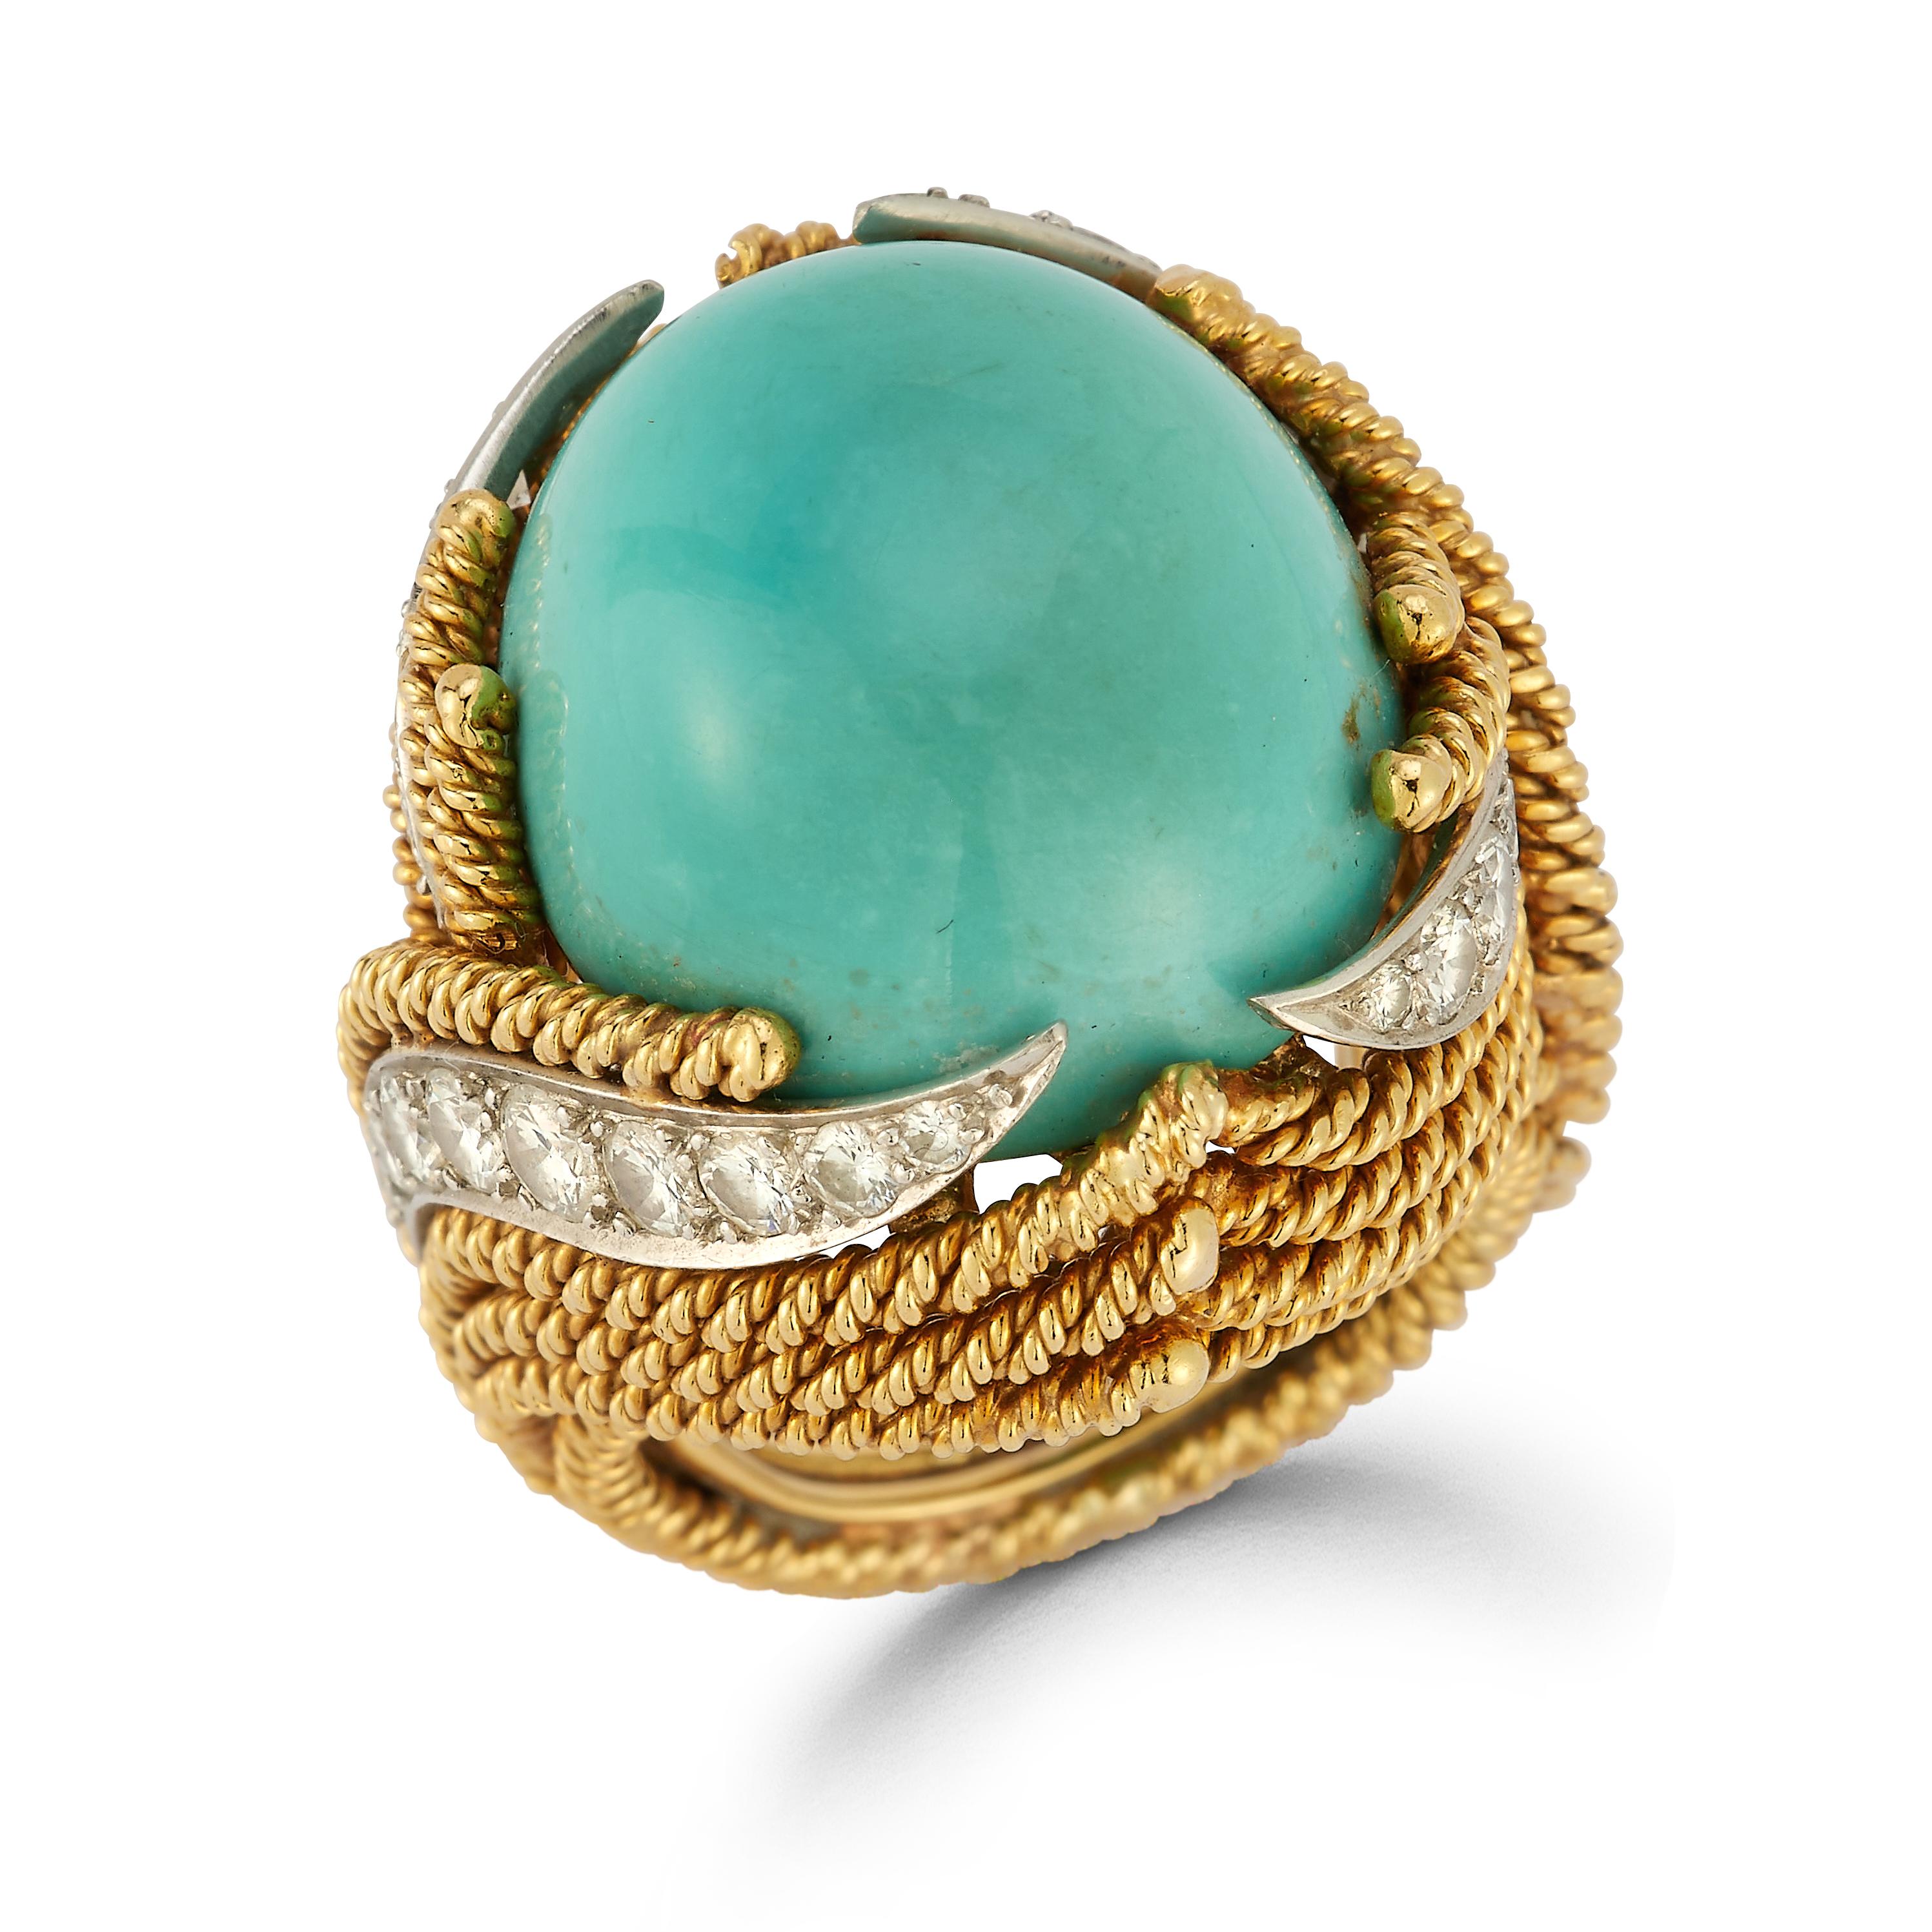 David Webb Turquoise & Diamond Cocktail Ring

An 18 karat textured yellow gold and platinum ring set with a cabochon turquoise and accented by 28 round cut diamonds

Signed Webb 18K

Ring Size: 5.75

Resizable free of charge